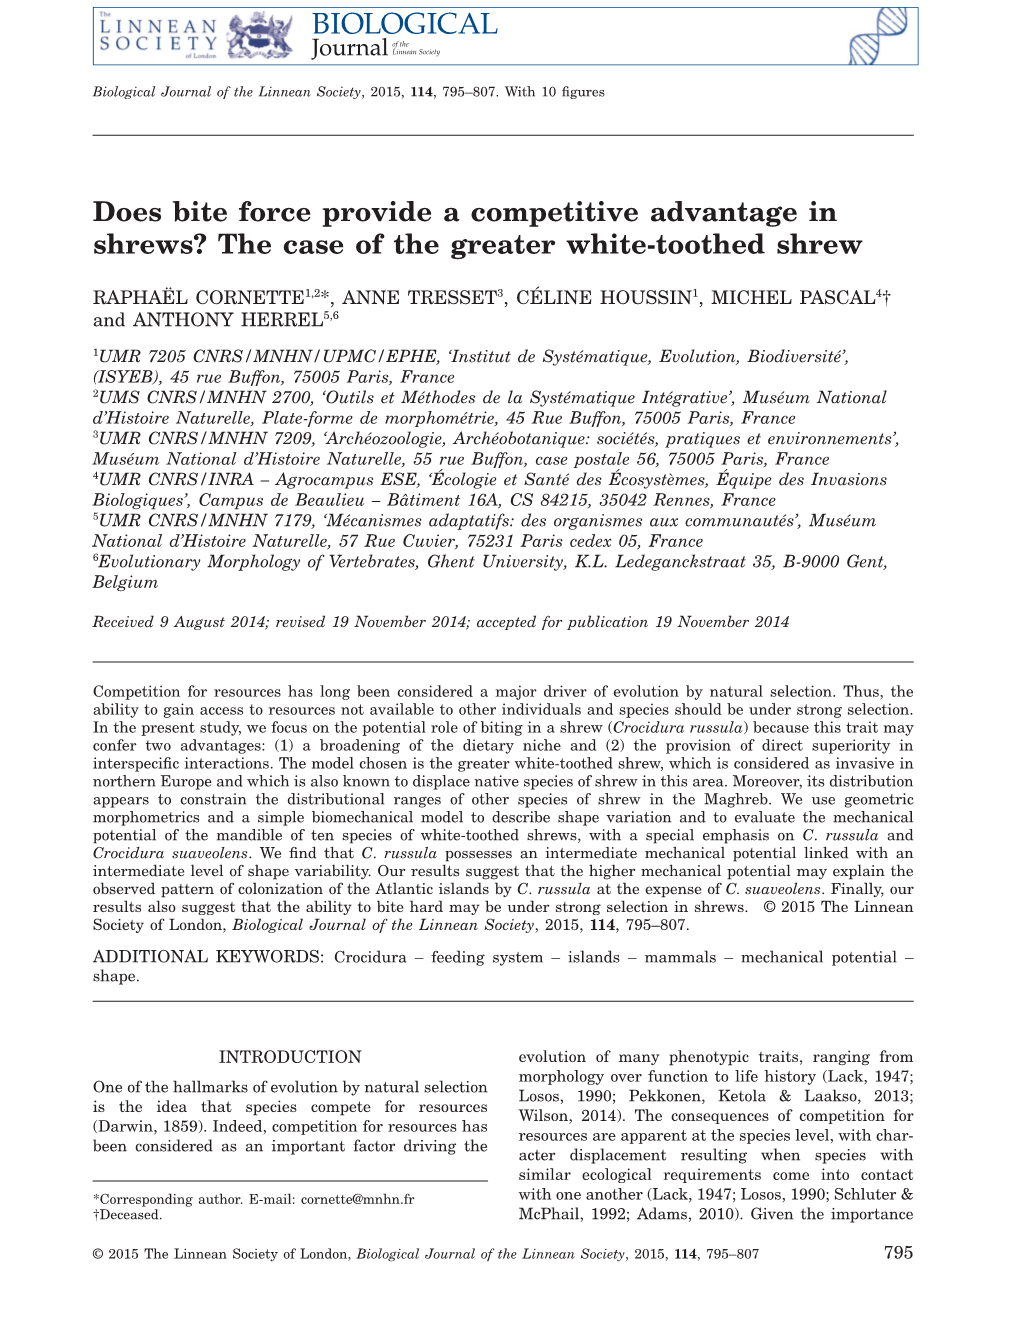 Does Bite Force Provide a Competitive Advantage in Shrews? the Case of the Greater Whitetoothed Shrew